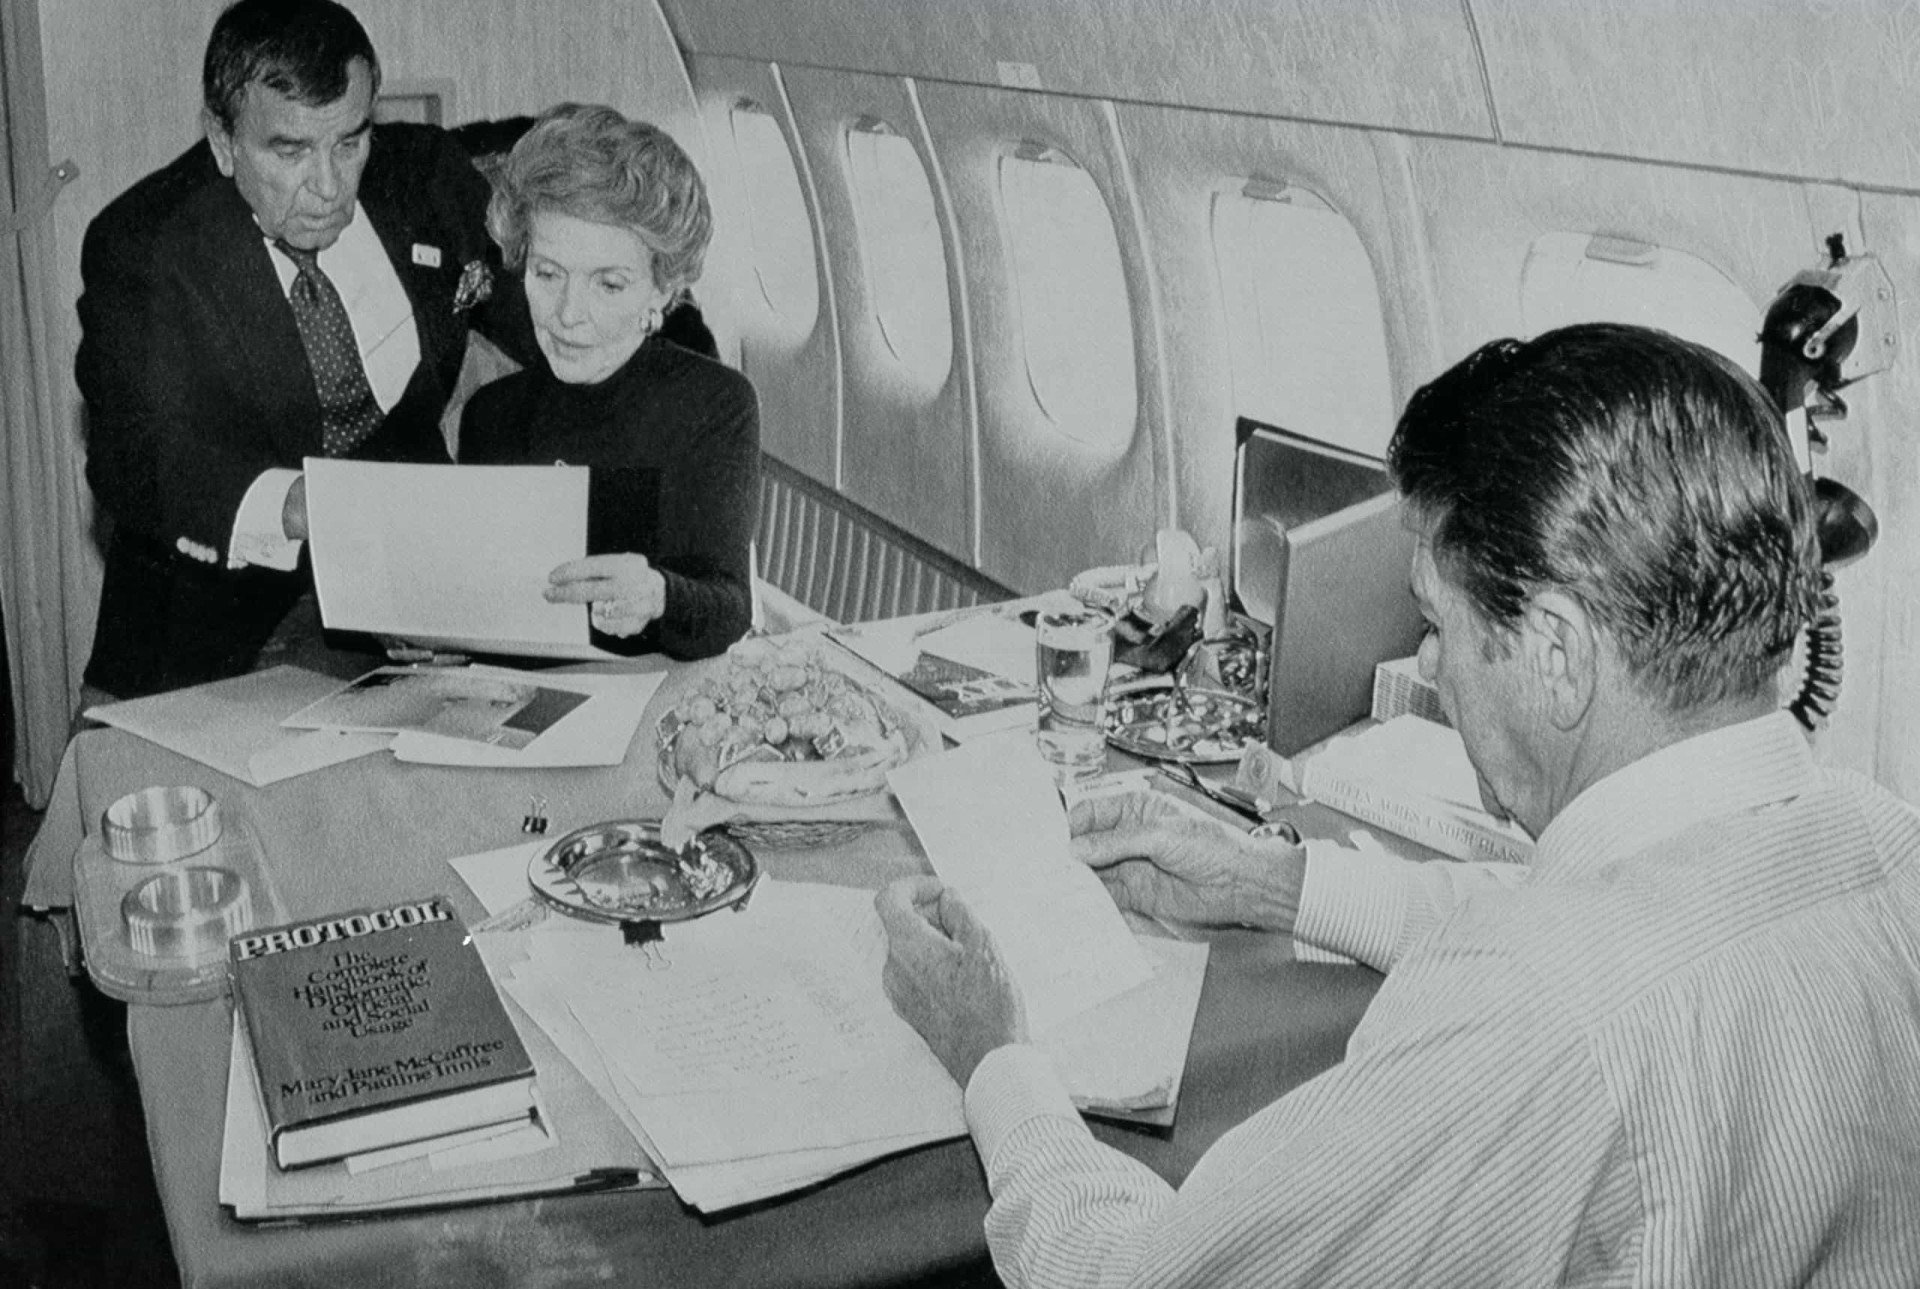 <p>Here is Nancy Reagan working with interior designer Ted Graber.</p><p>You may also like:<a href="https://www.starsinsider.com/n/114291?utm_source=msn.com&utm_medium=display&utm_campaign=referral_description&utm_content=465881v2en-us"> The hottest and coldest places on the planet</a></p>